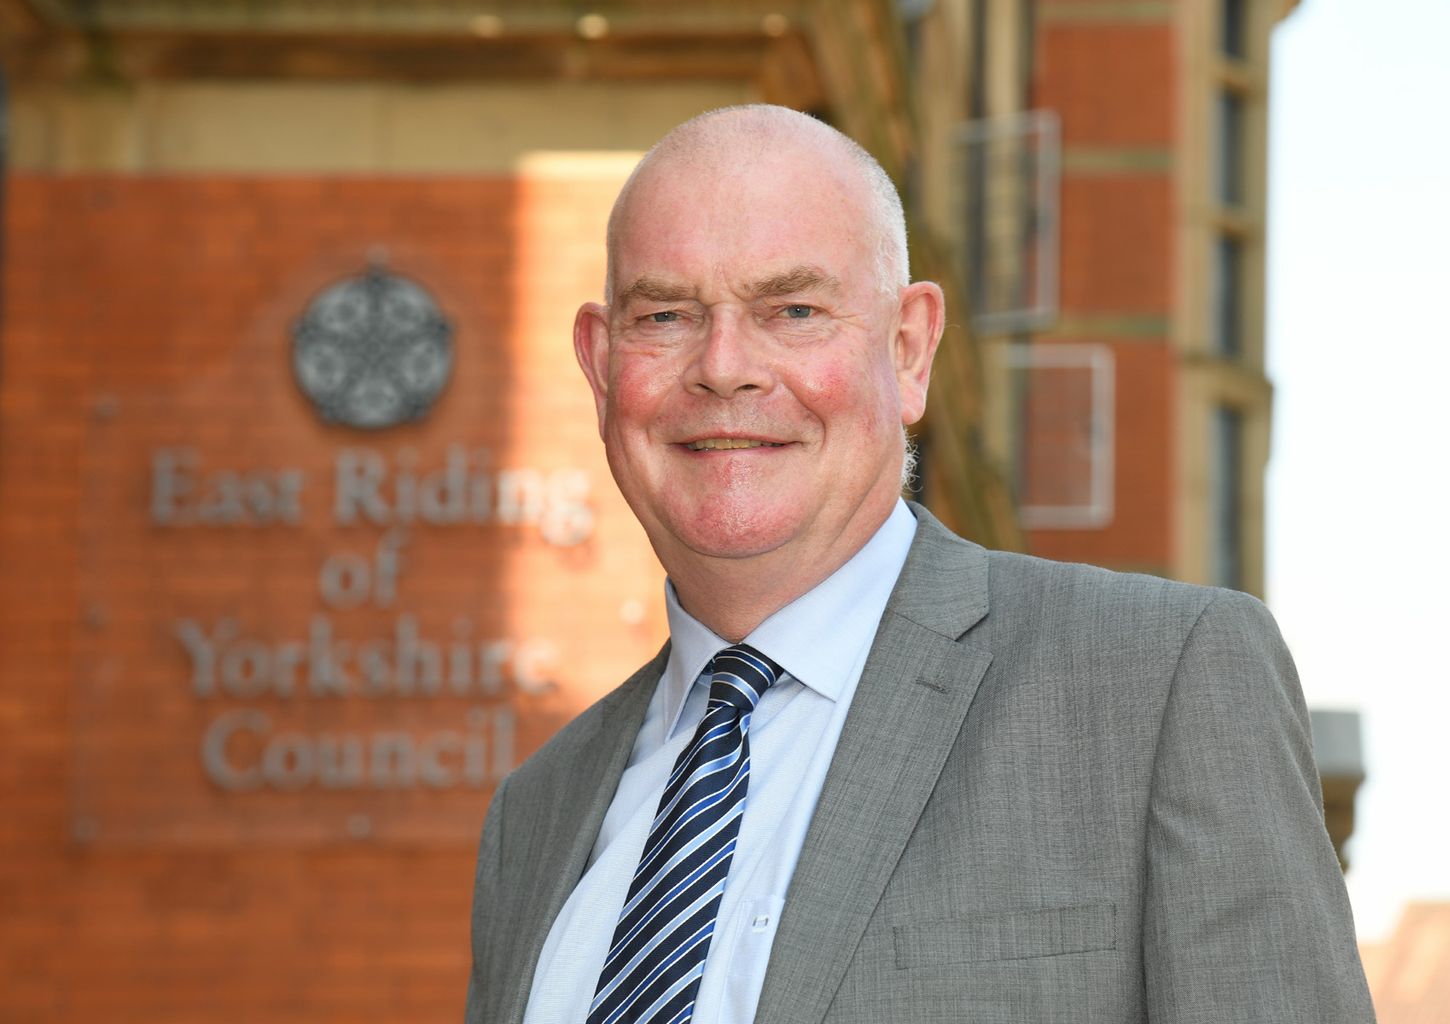 East Riding of Yorkshire Council Conservative leader reelected